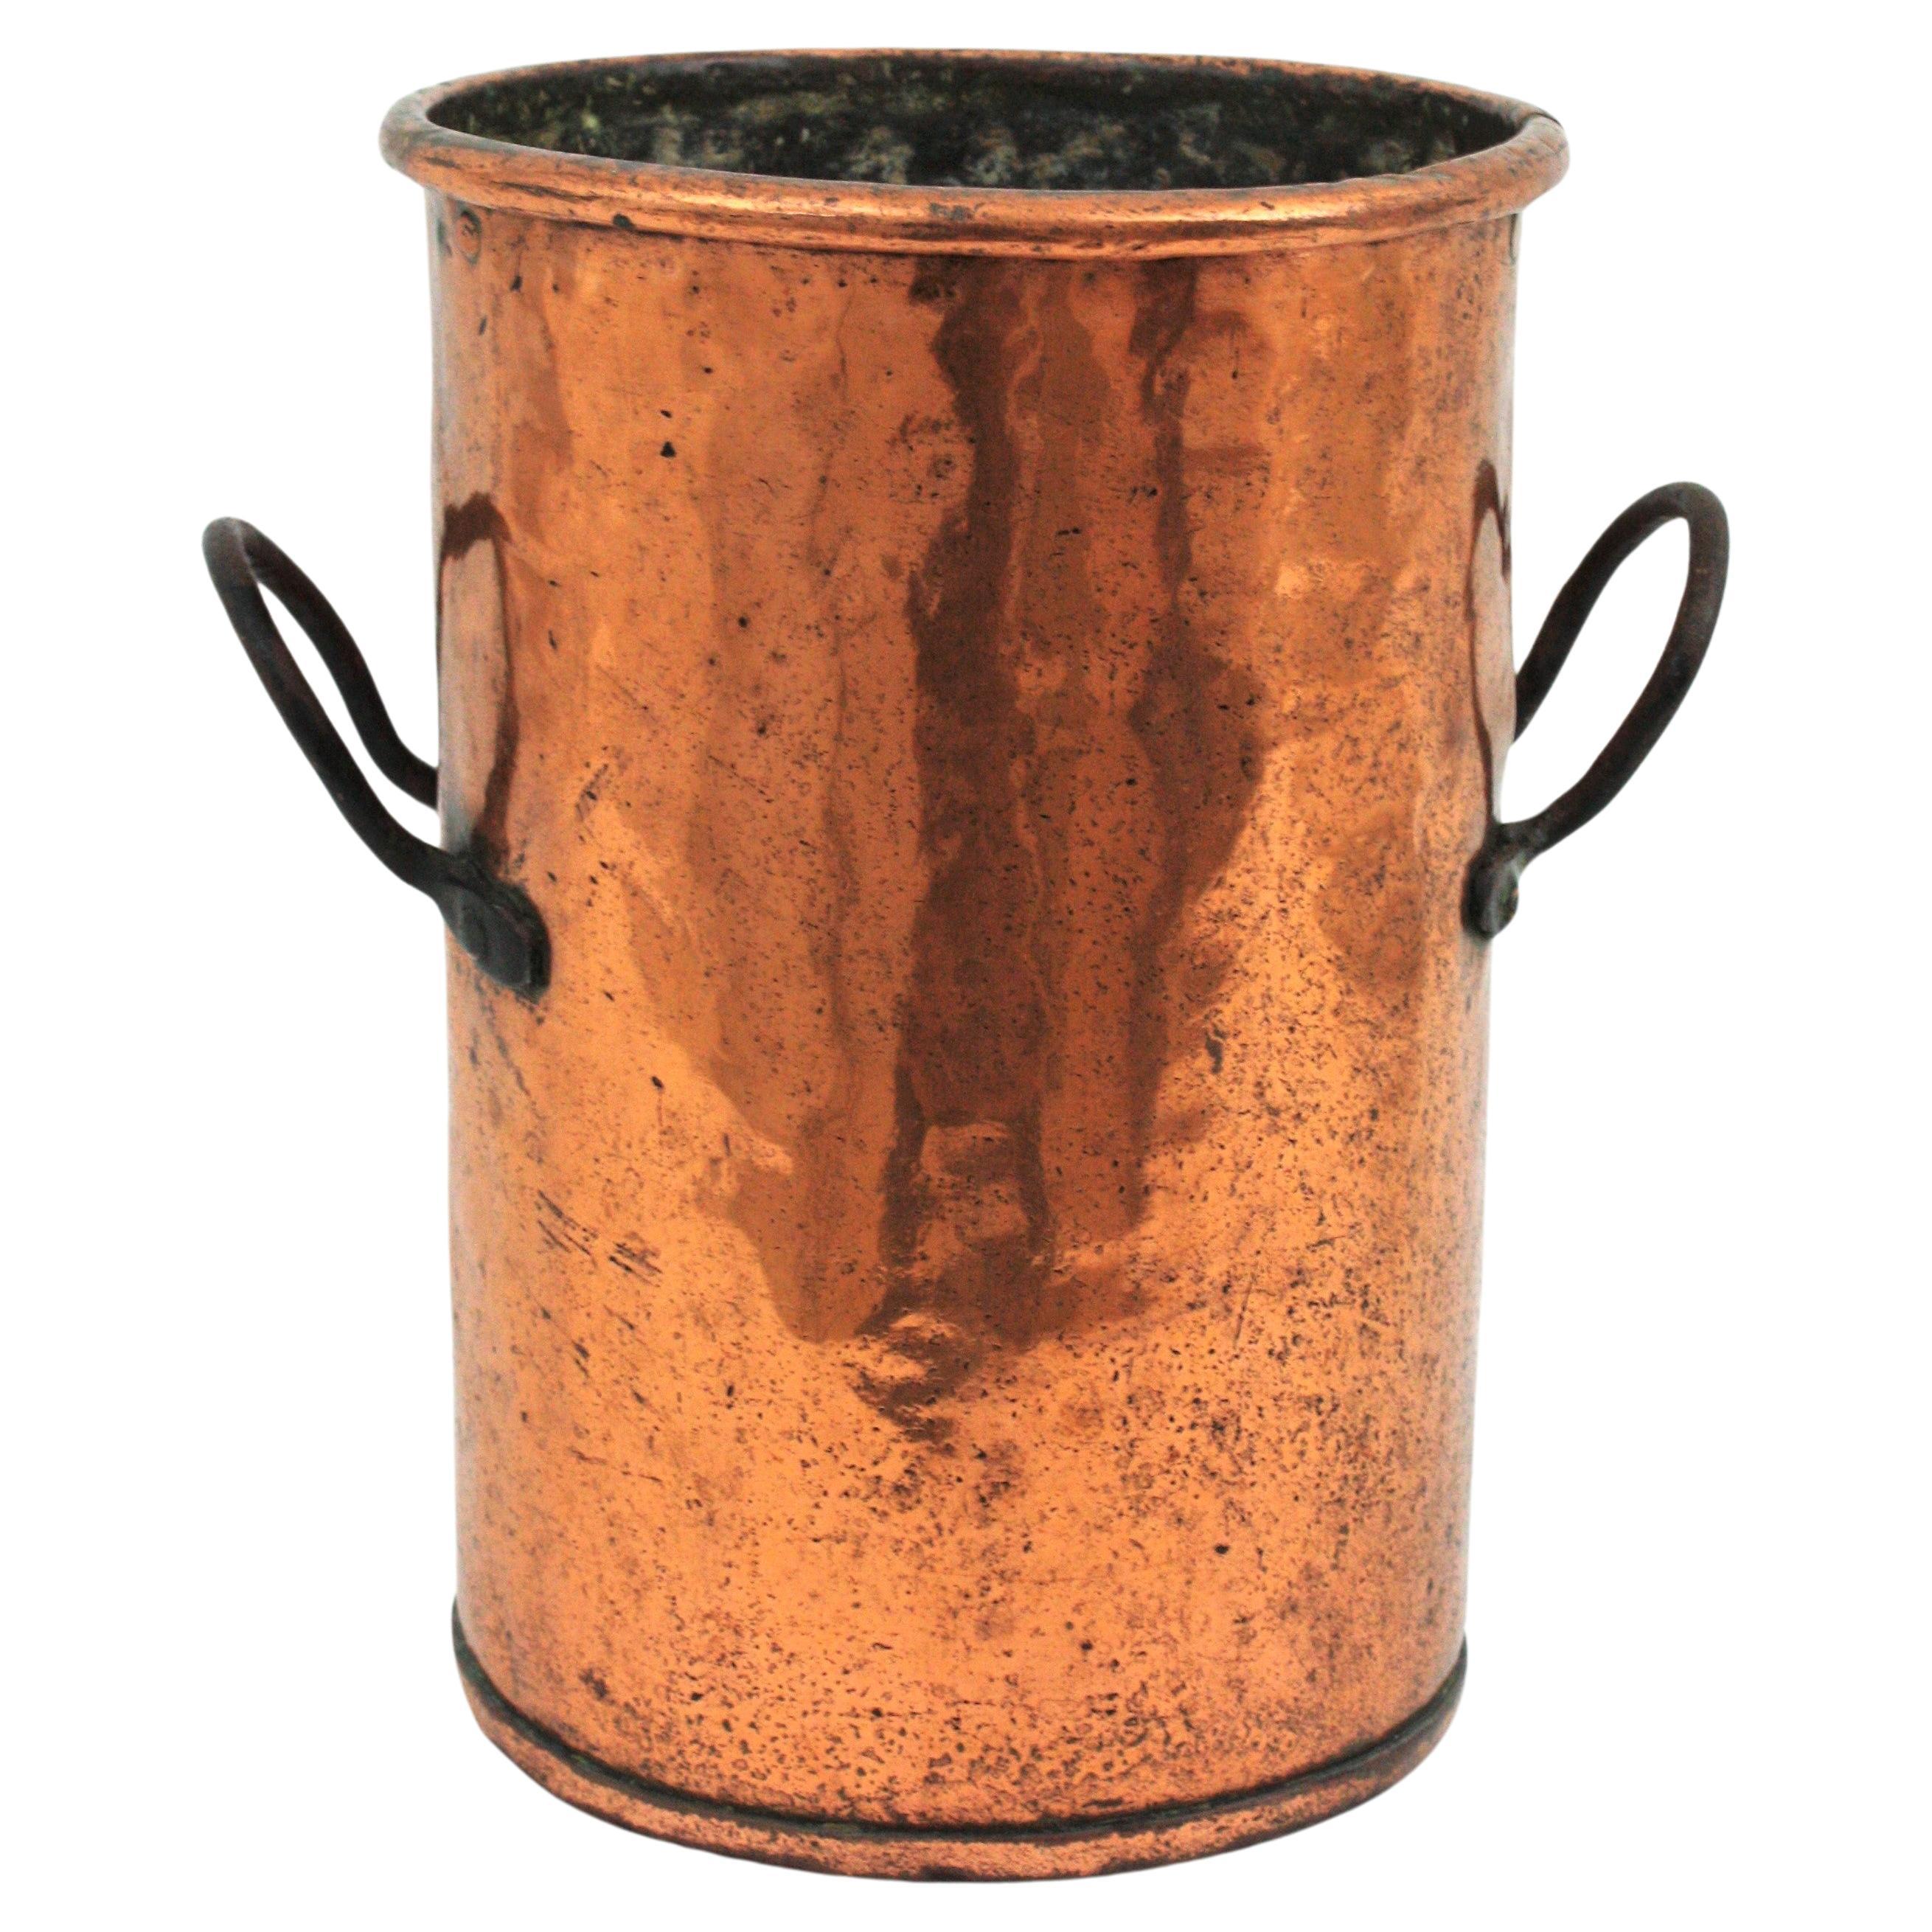 Antique hand-hammered tall copper cauldron with iron handles. France, 1930s-1940s
This handcrafted copper cauldron has a nice design and a terrific aged patina. The copper is heavily marked by the pass of time and it has a strong visual effect.
Iron